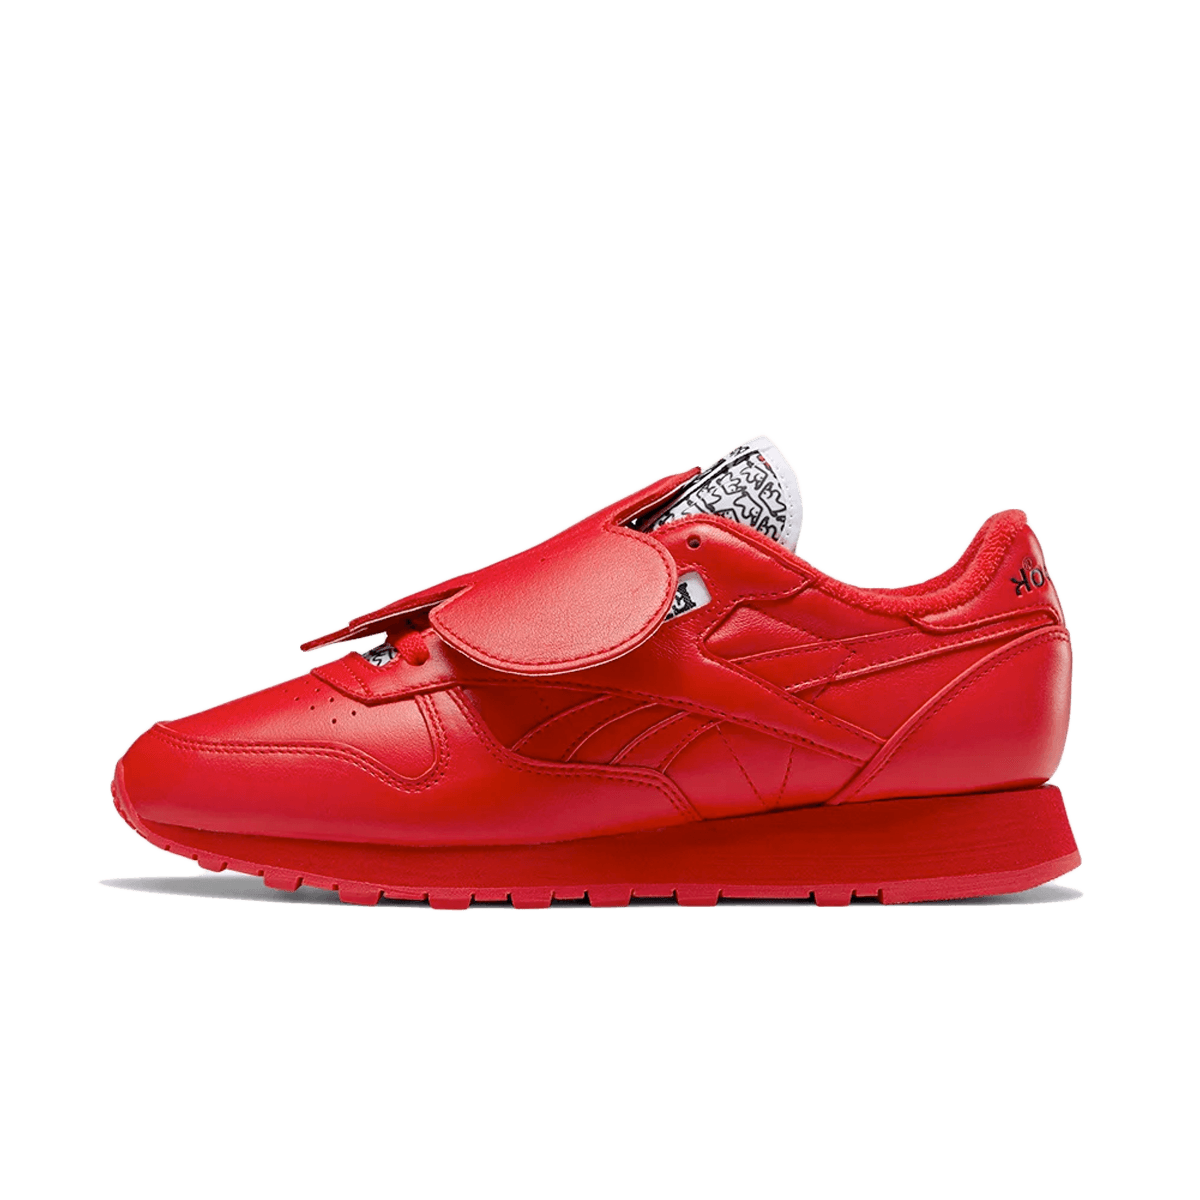 Eames x Reebok Classic Leather 'Vector Red' GY6384